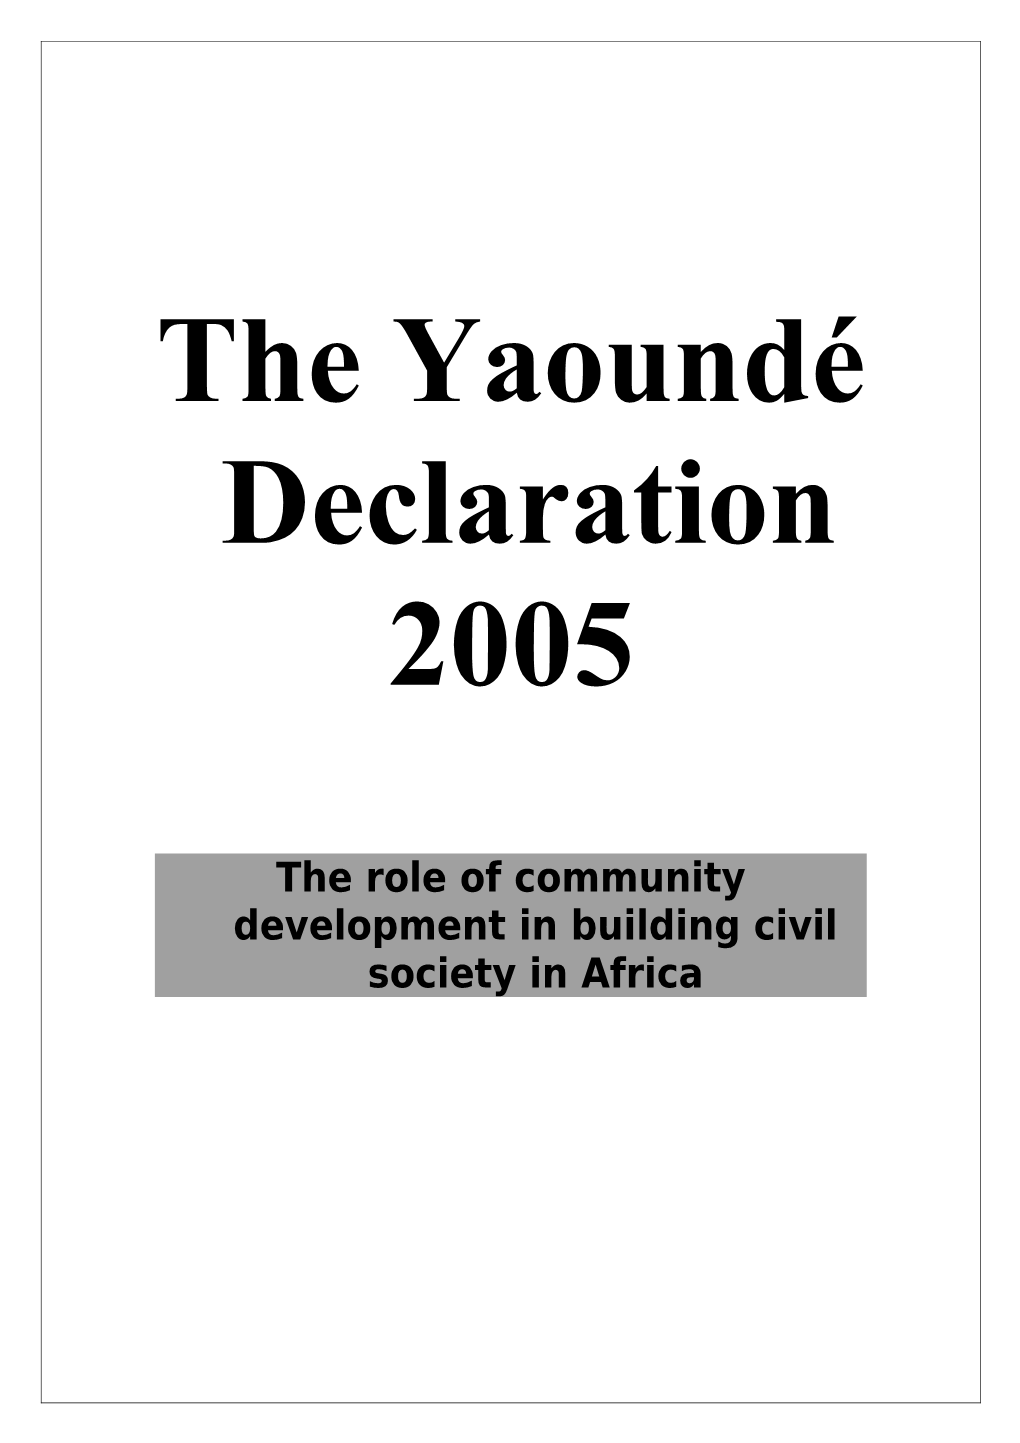 The Role of Community Development in Building Civil Society in Africa